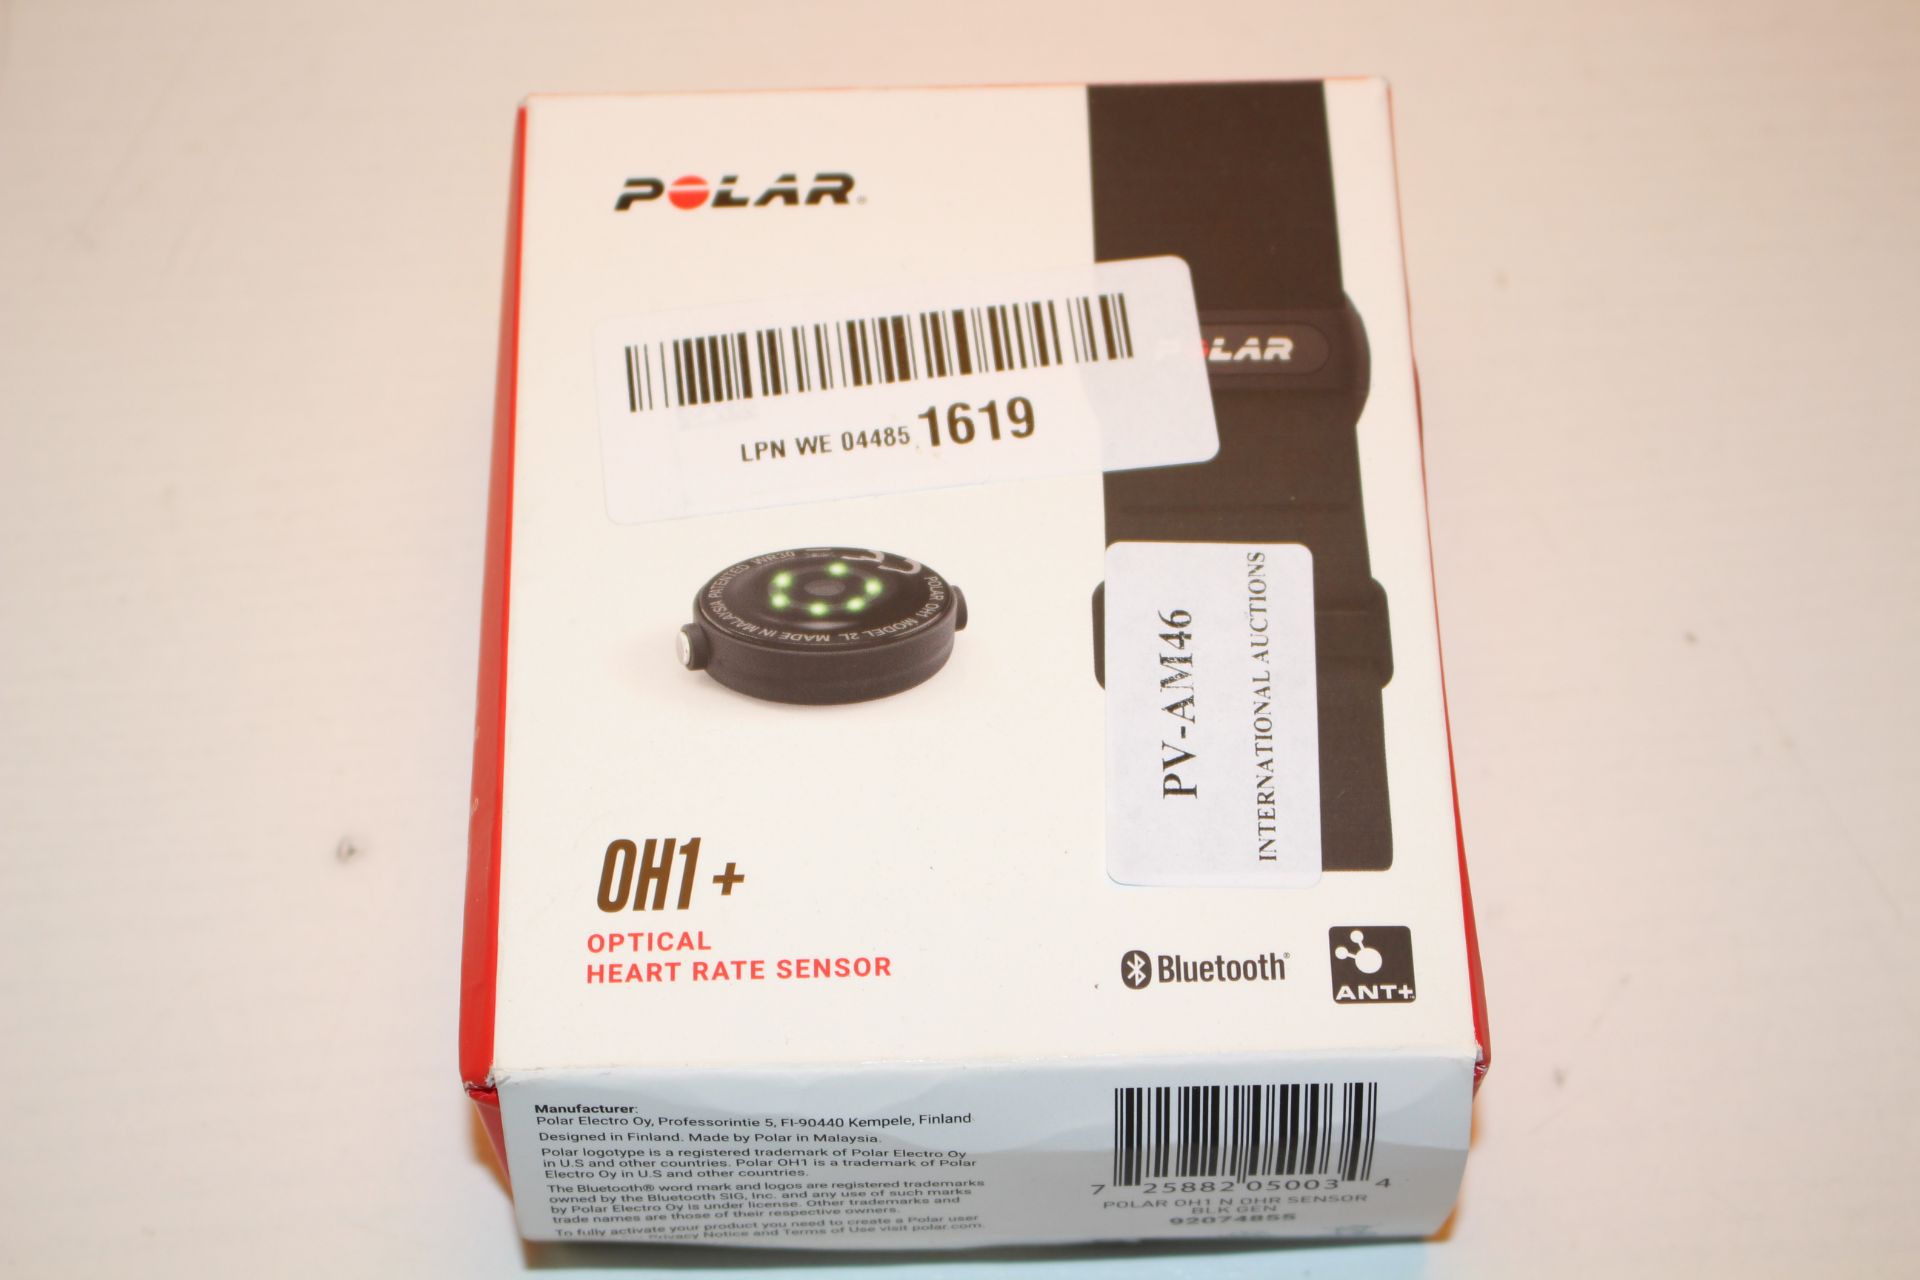 BOXED POLAR OH1+ OPTICAL HEART RATE SENSOR RRP £64.49Condition ReportAppraisal Available on Request-